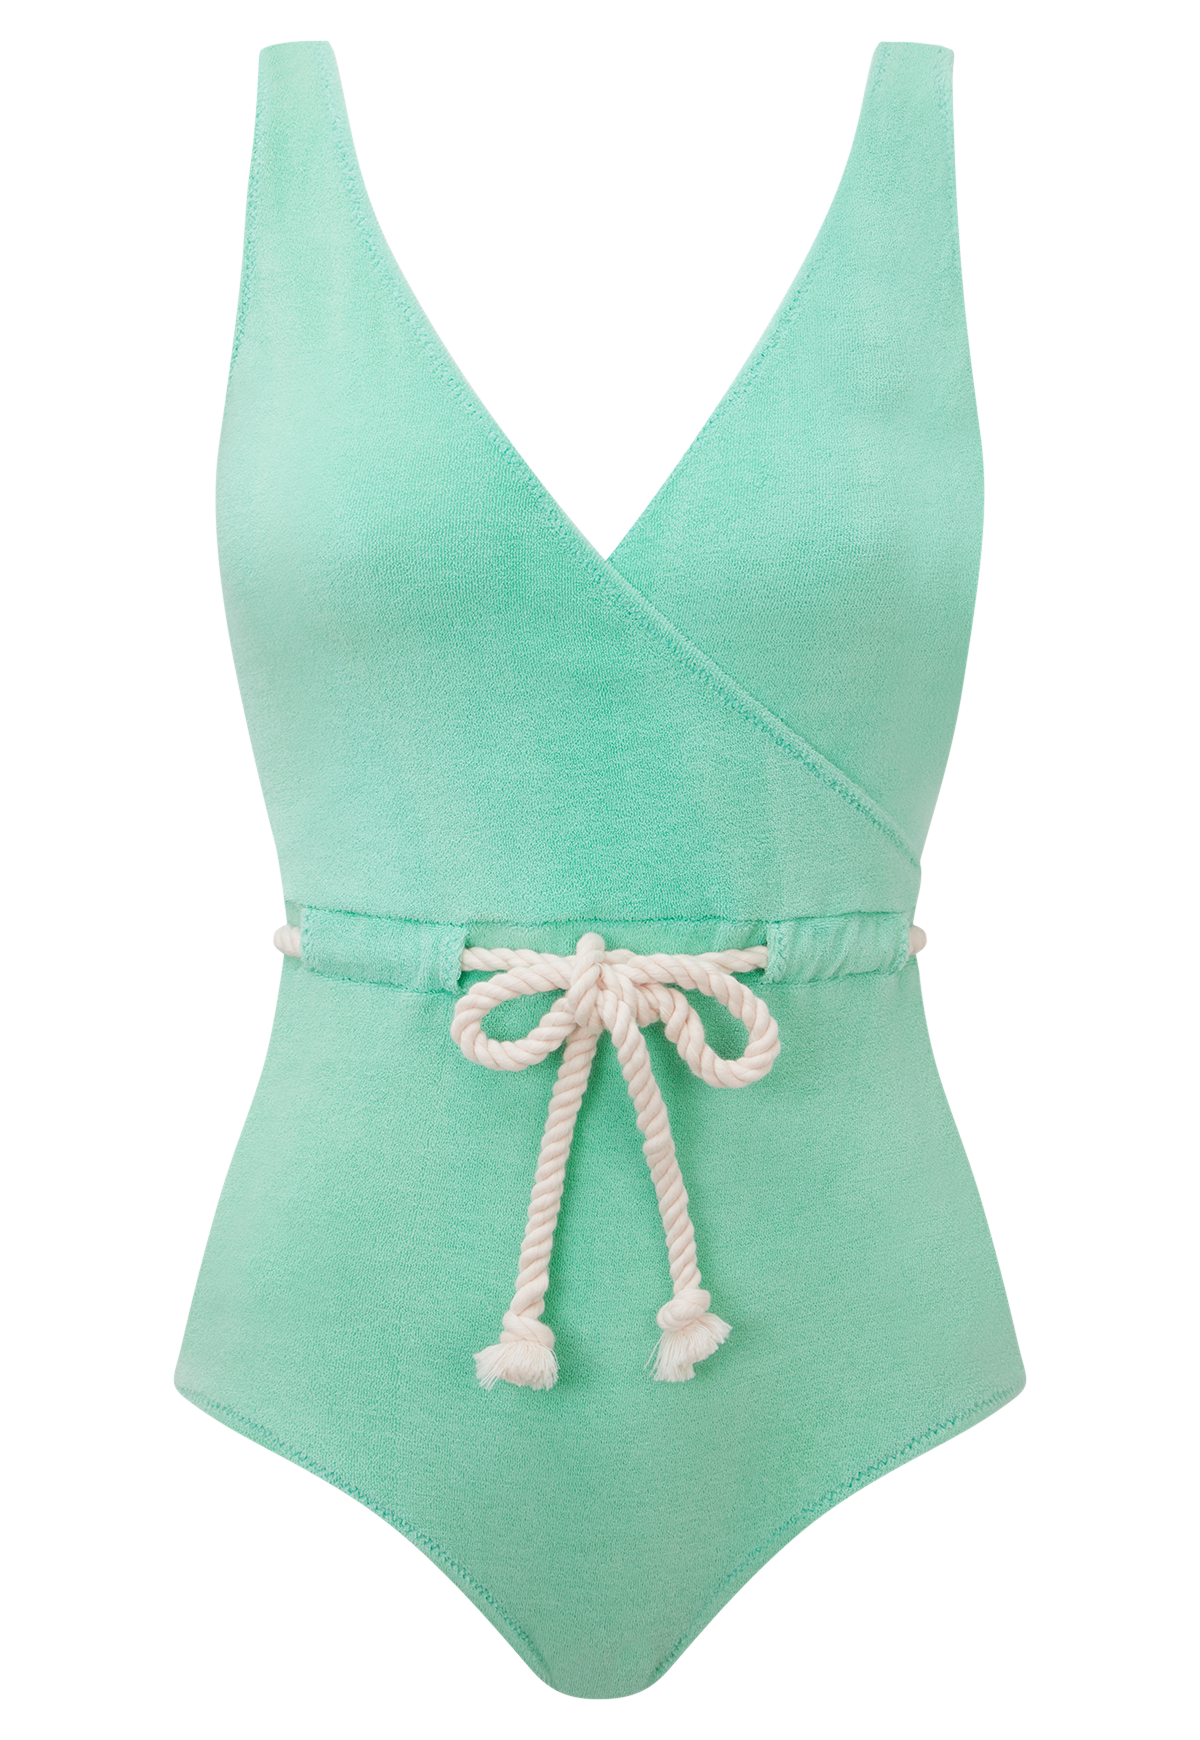 THE YASMIN MAILLOT in SEAFOAM TERRY CLOTH